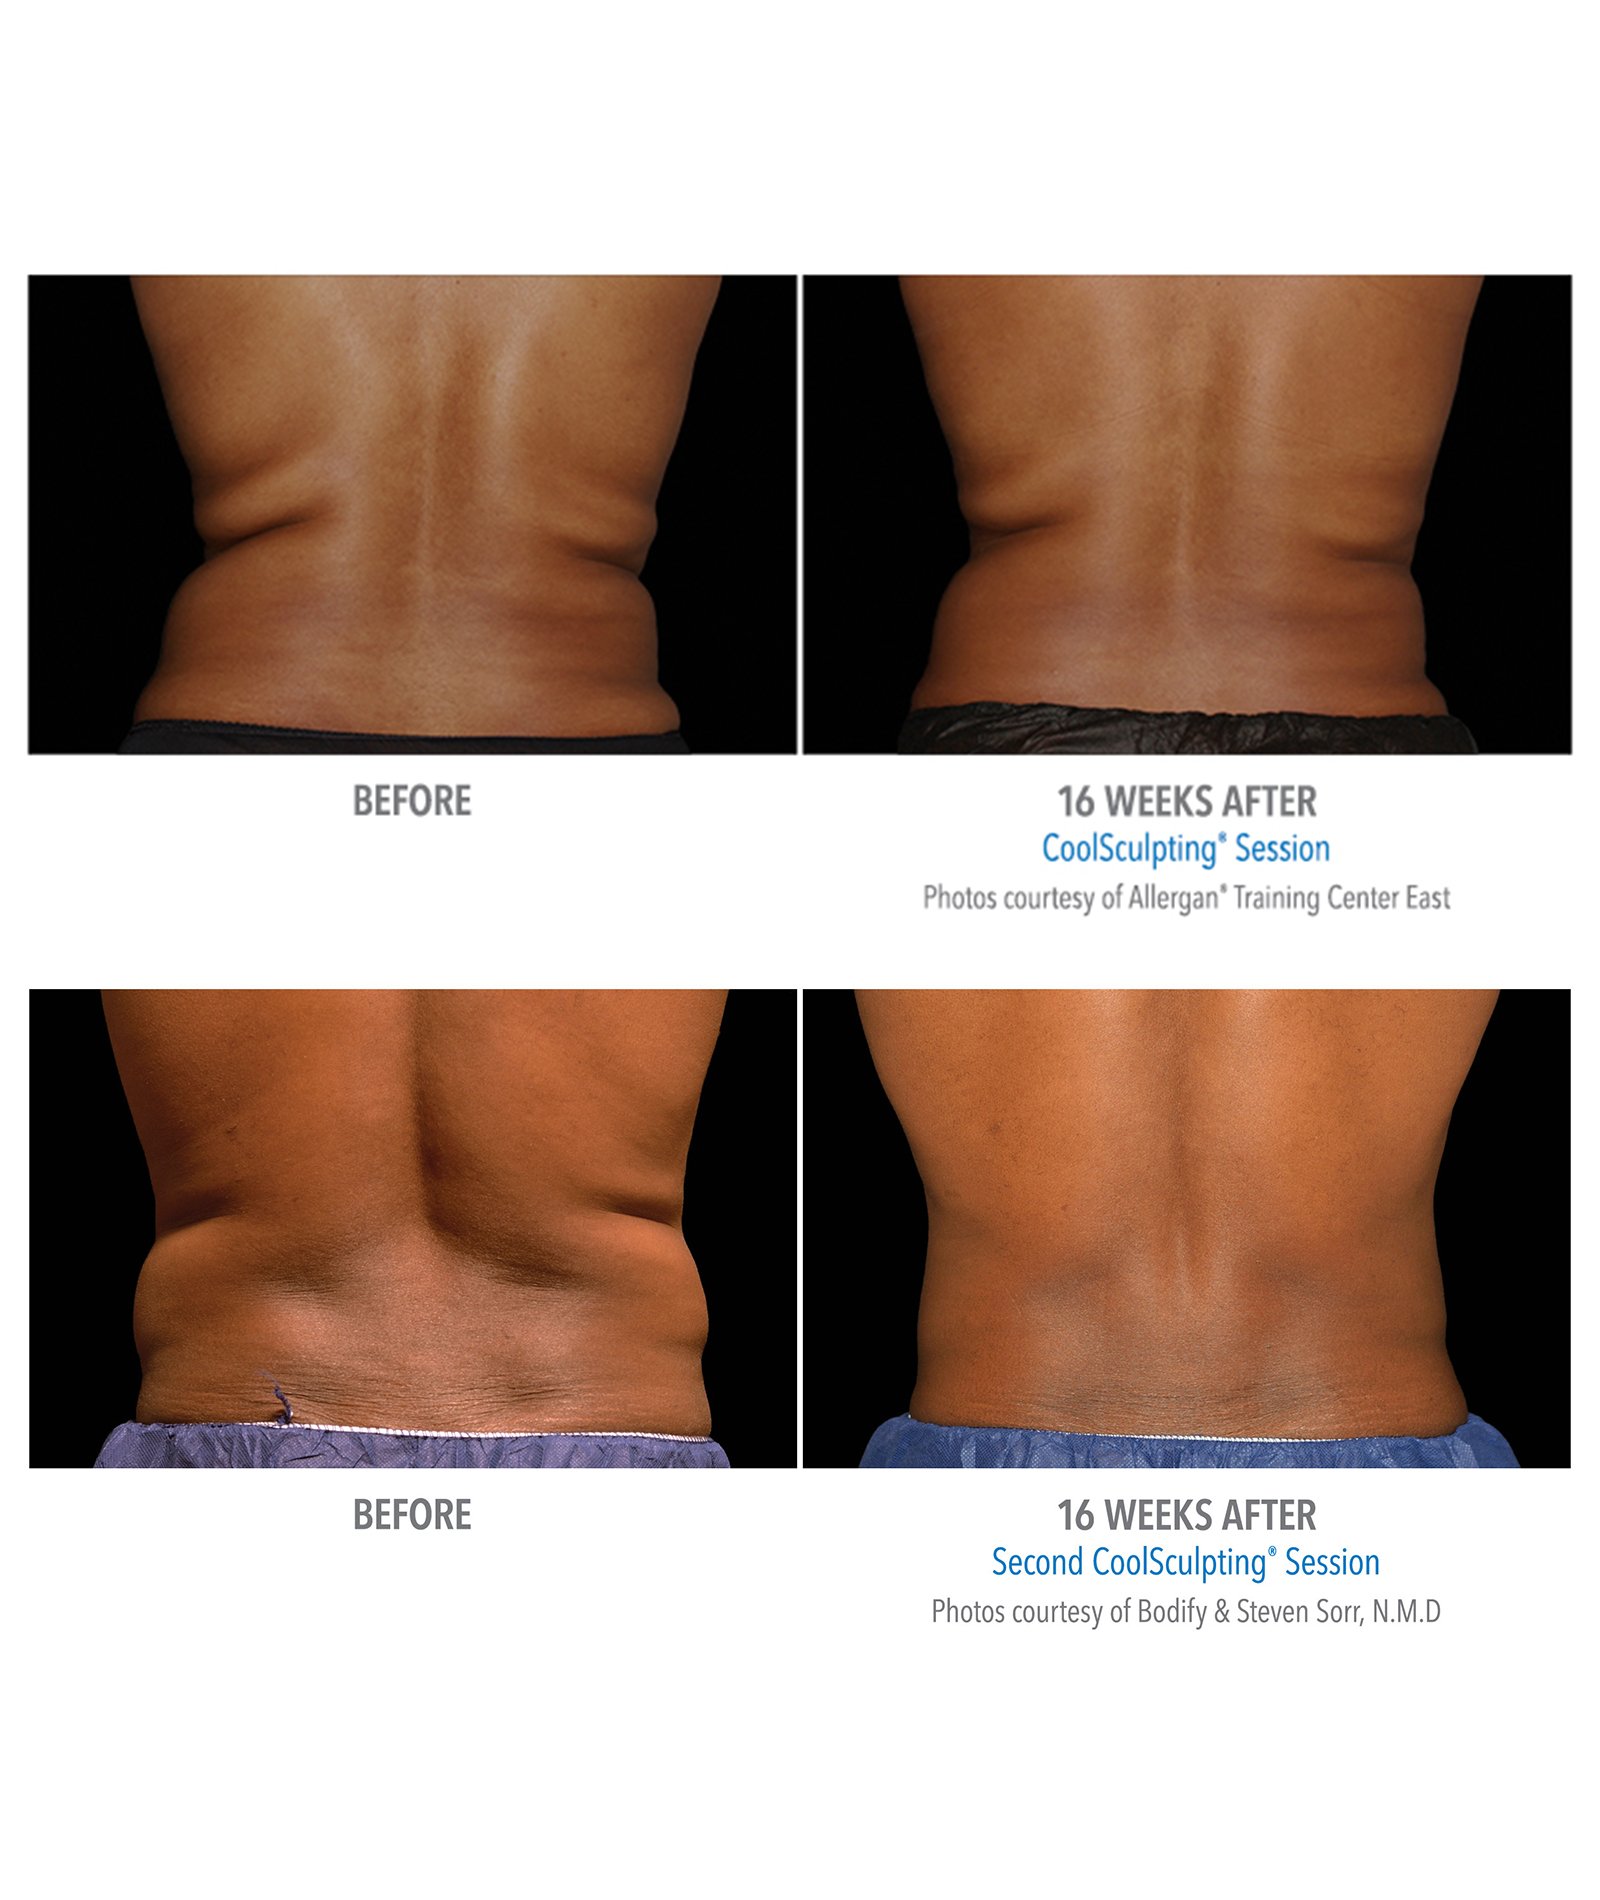 Coolsculpting – Body Contouring